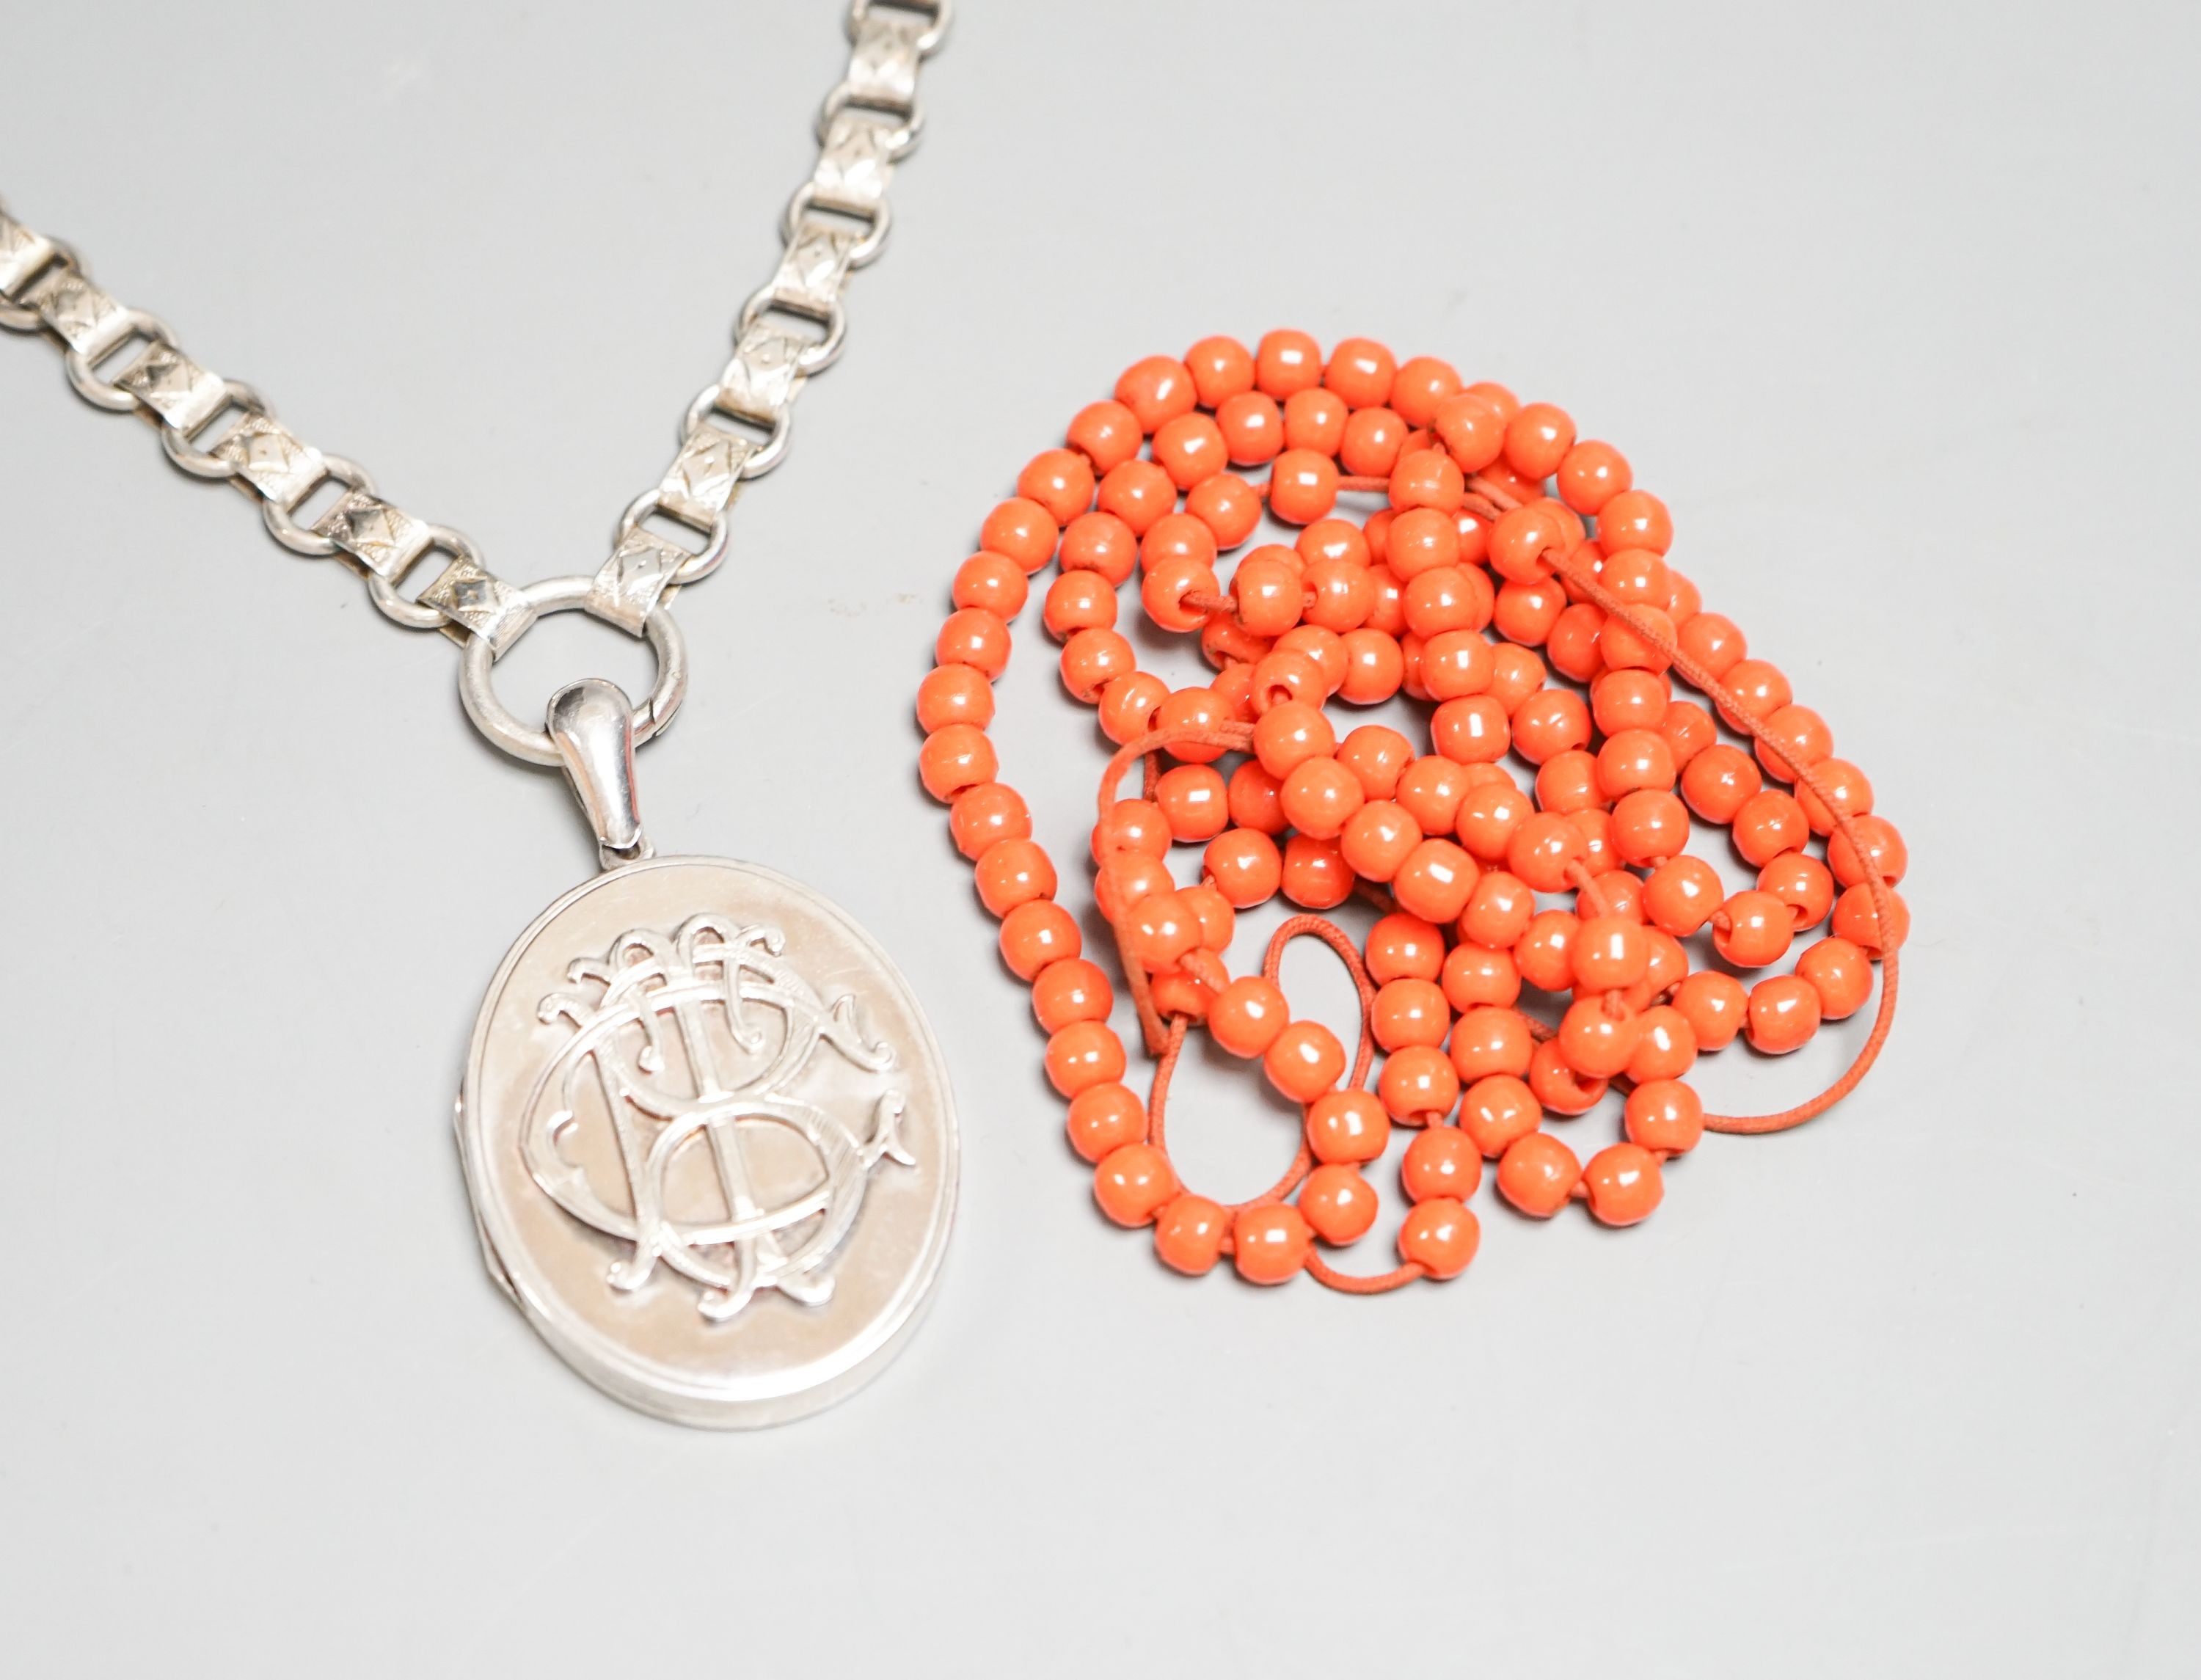 A white metal oval locket with monogram, 43mm, on a fancy white metal chain and a string of coral coloured glass beads.